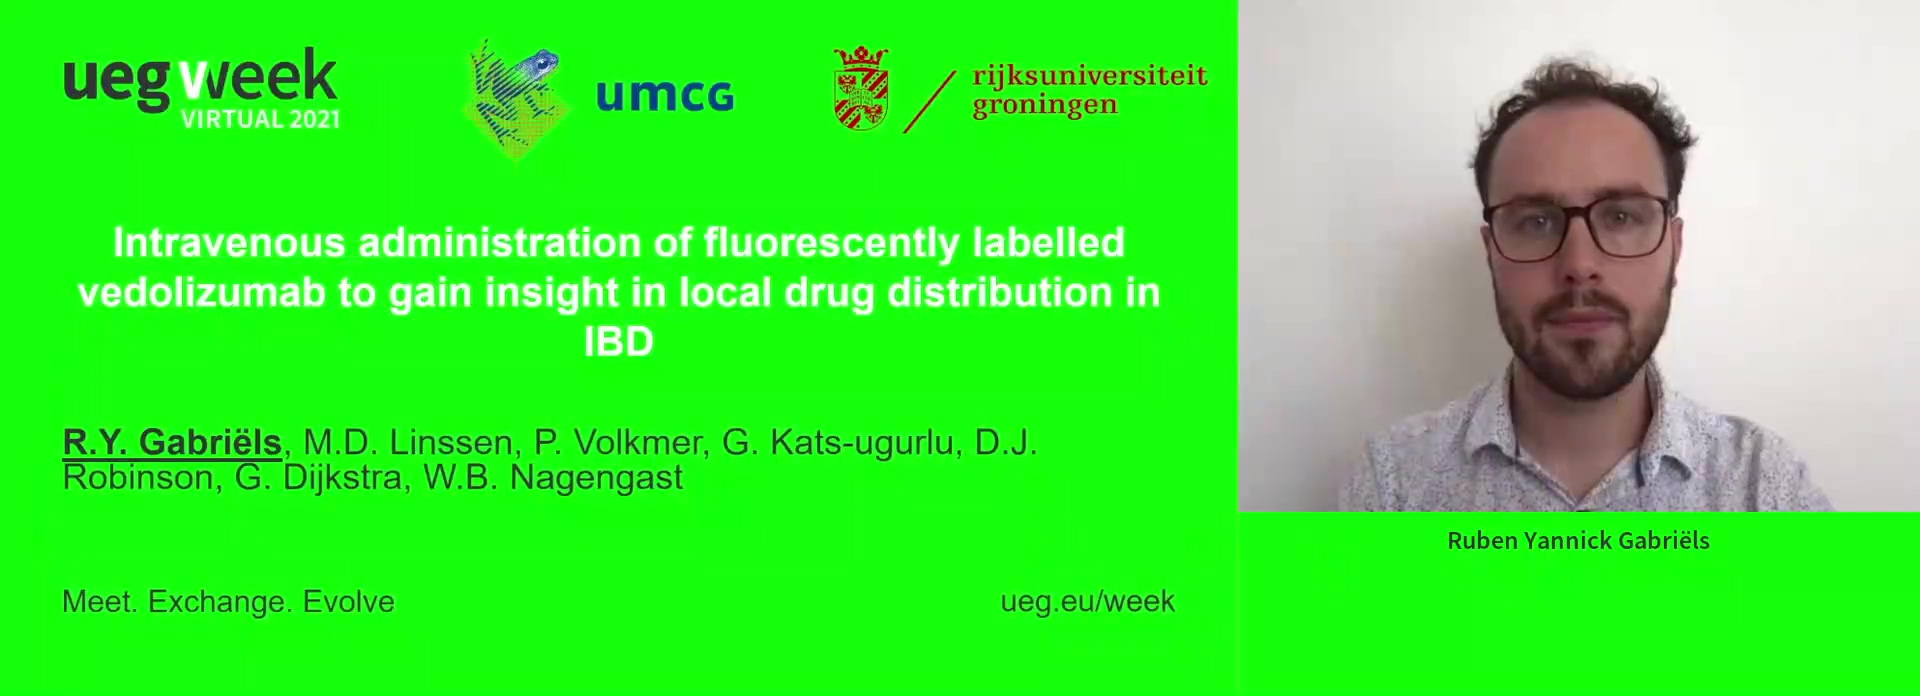 INTRAVENOUS ADMINISTRATION OF FLUORESCENTLY LABELLED VEDOLIZUMAB TO GAIN INSIGHT IN LOCAL DRUG DISTRIBUTION AND PHARMACODYNAMICS IN INFLAMMATORY BOWEL DISEASE DURING ENDOSCOPY